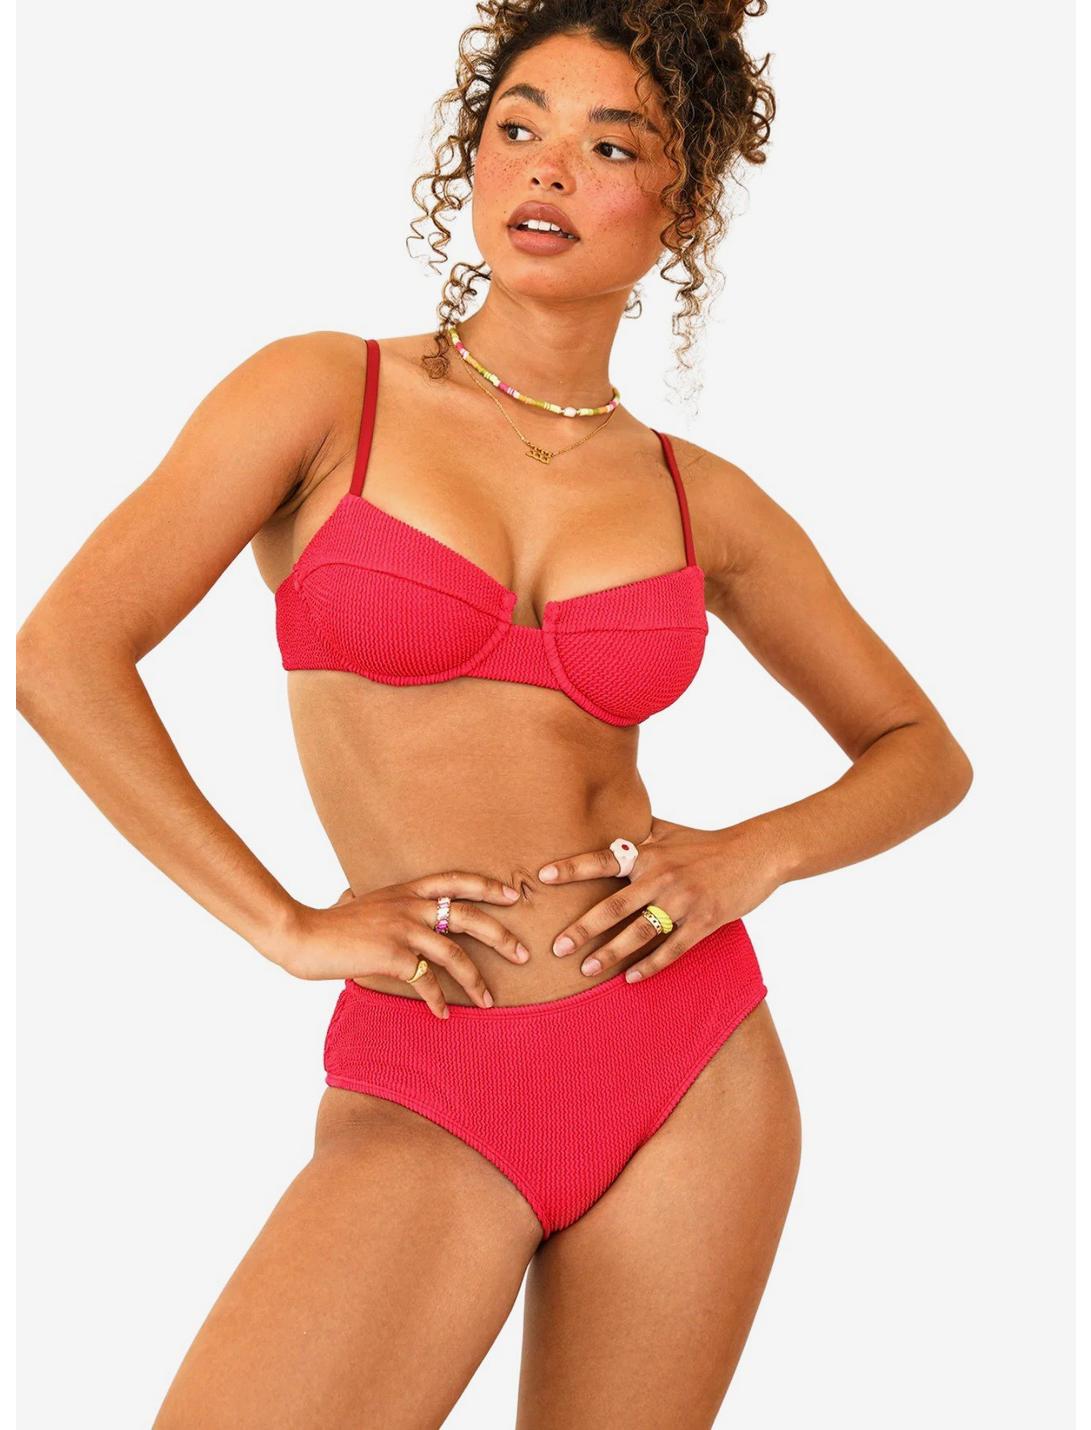 Dippin' Daisy's Gigi Swim Top Sunset Glow Red, RED, hi-res